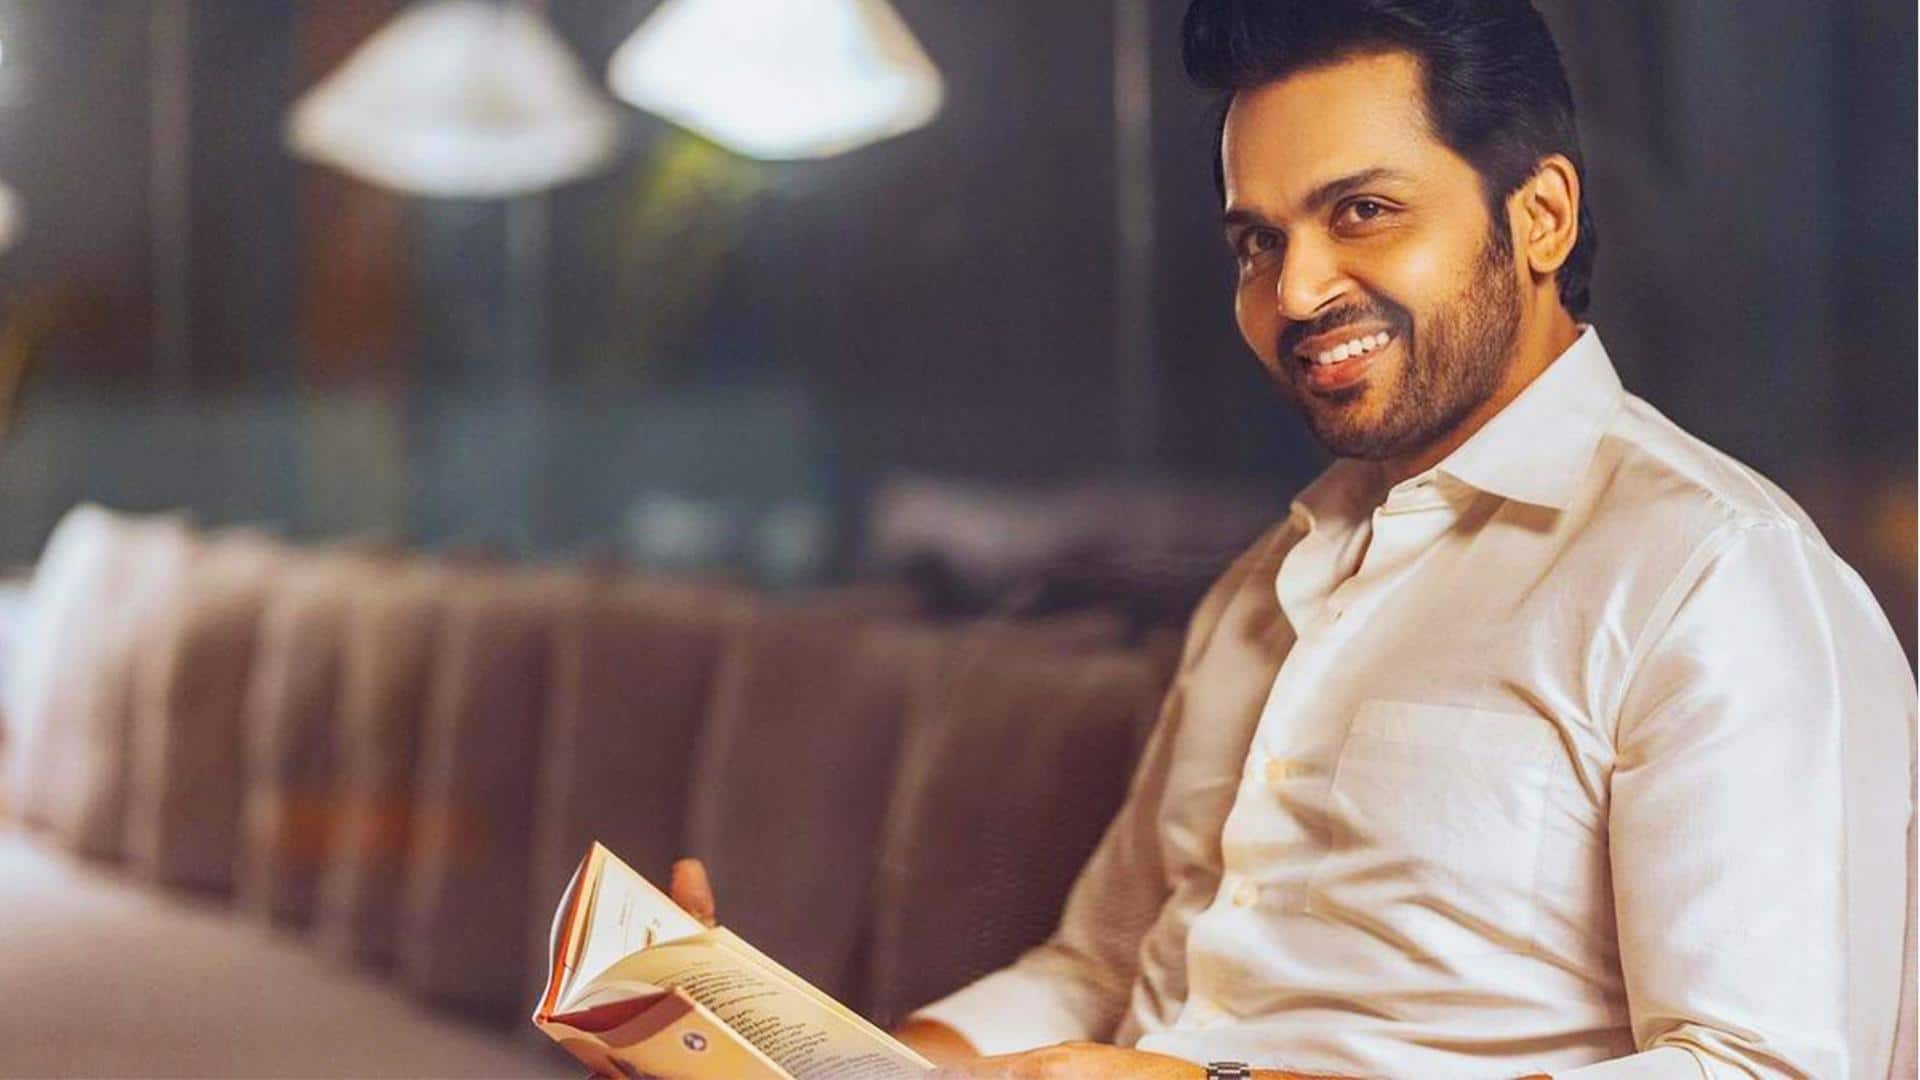 'PS-I' actor Karthi's Facebook hacked; superstar trying to retrieve account